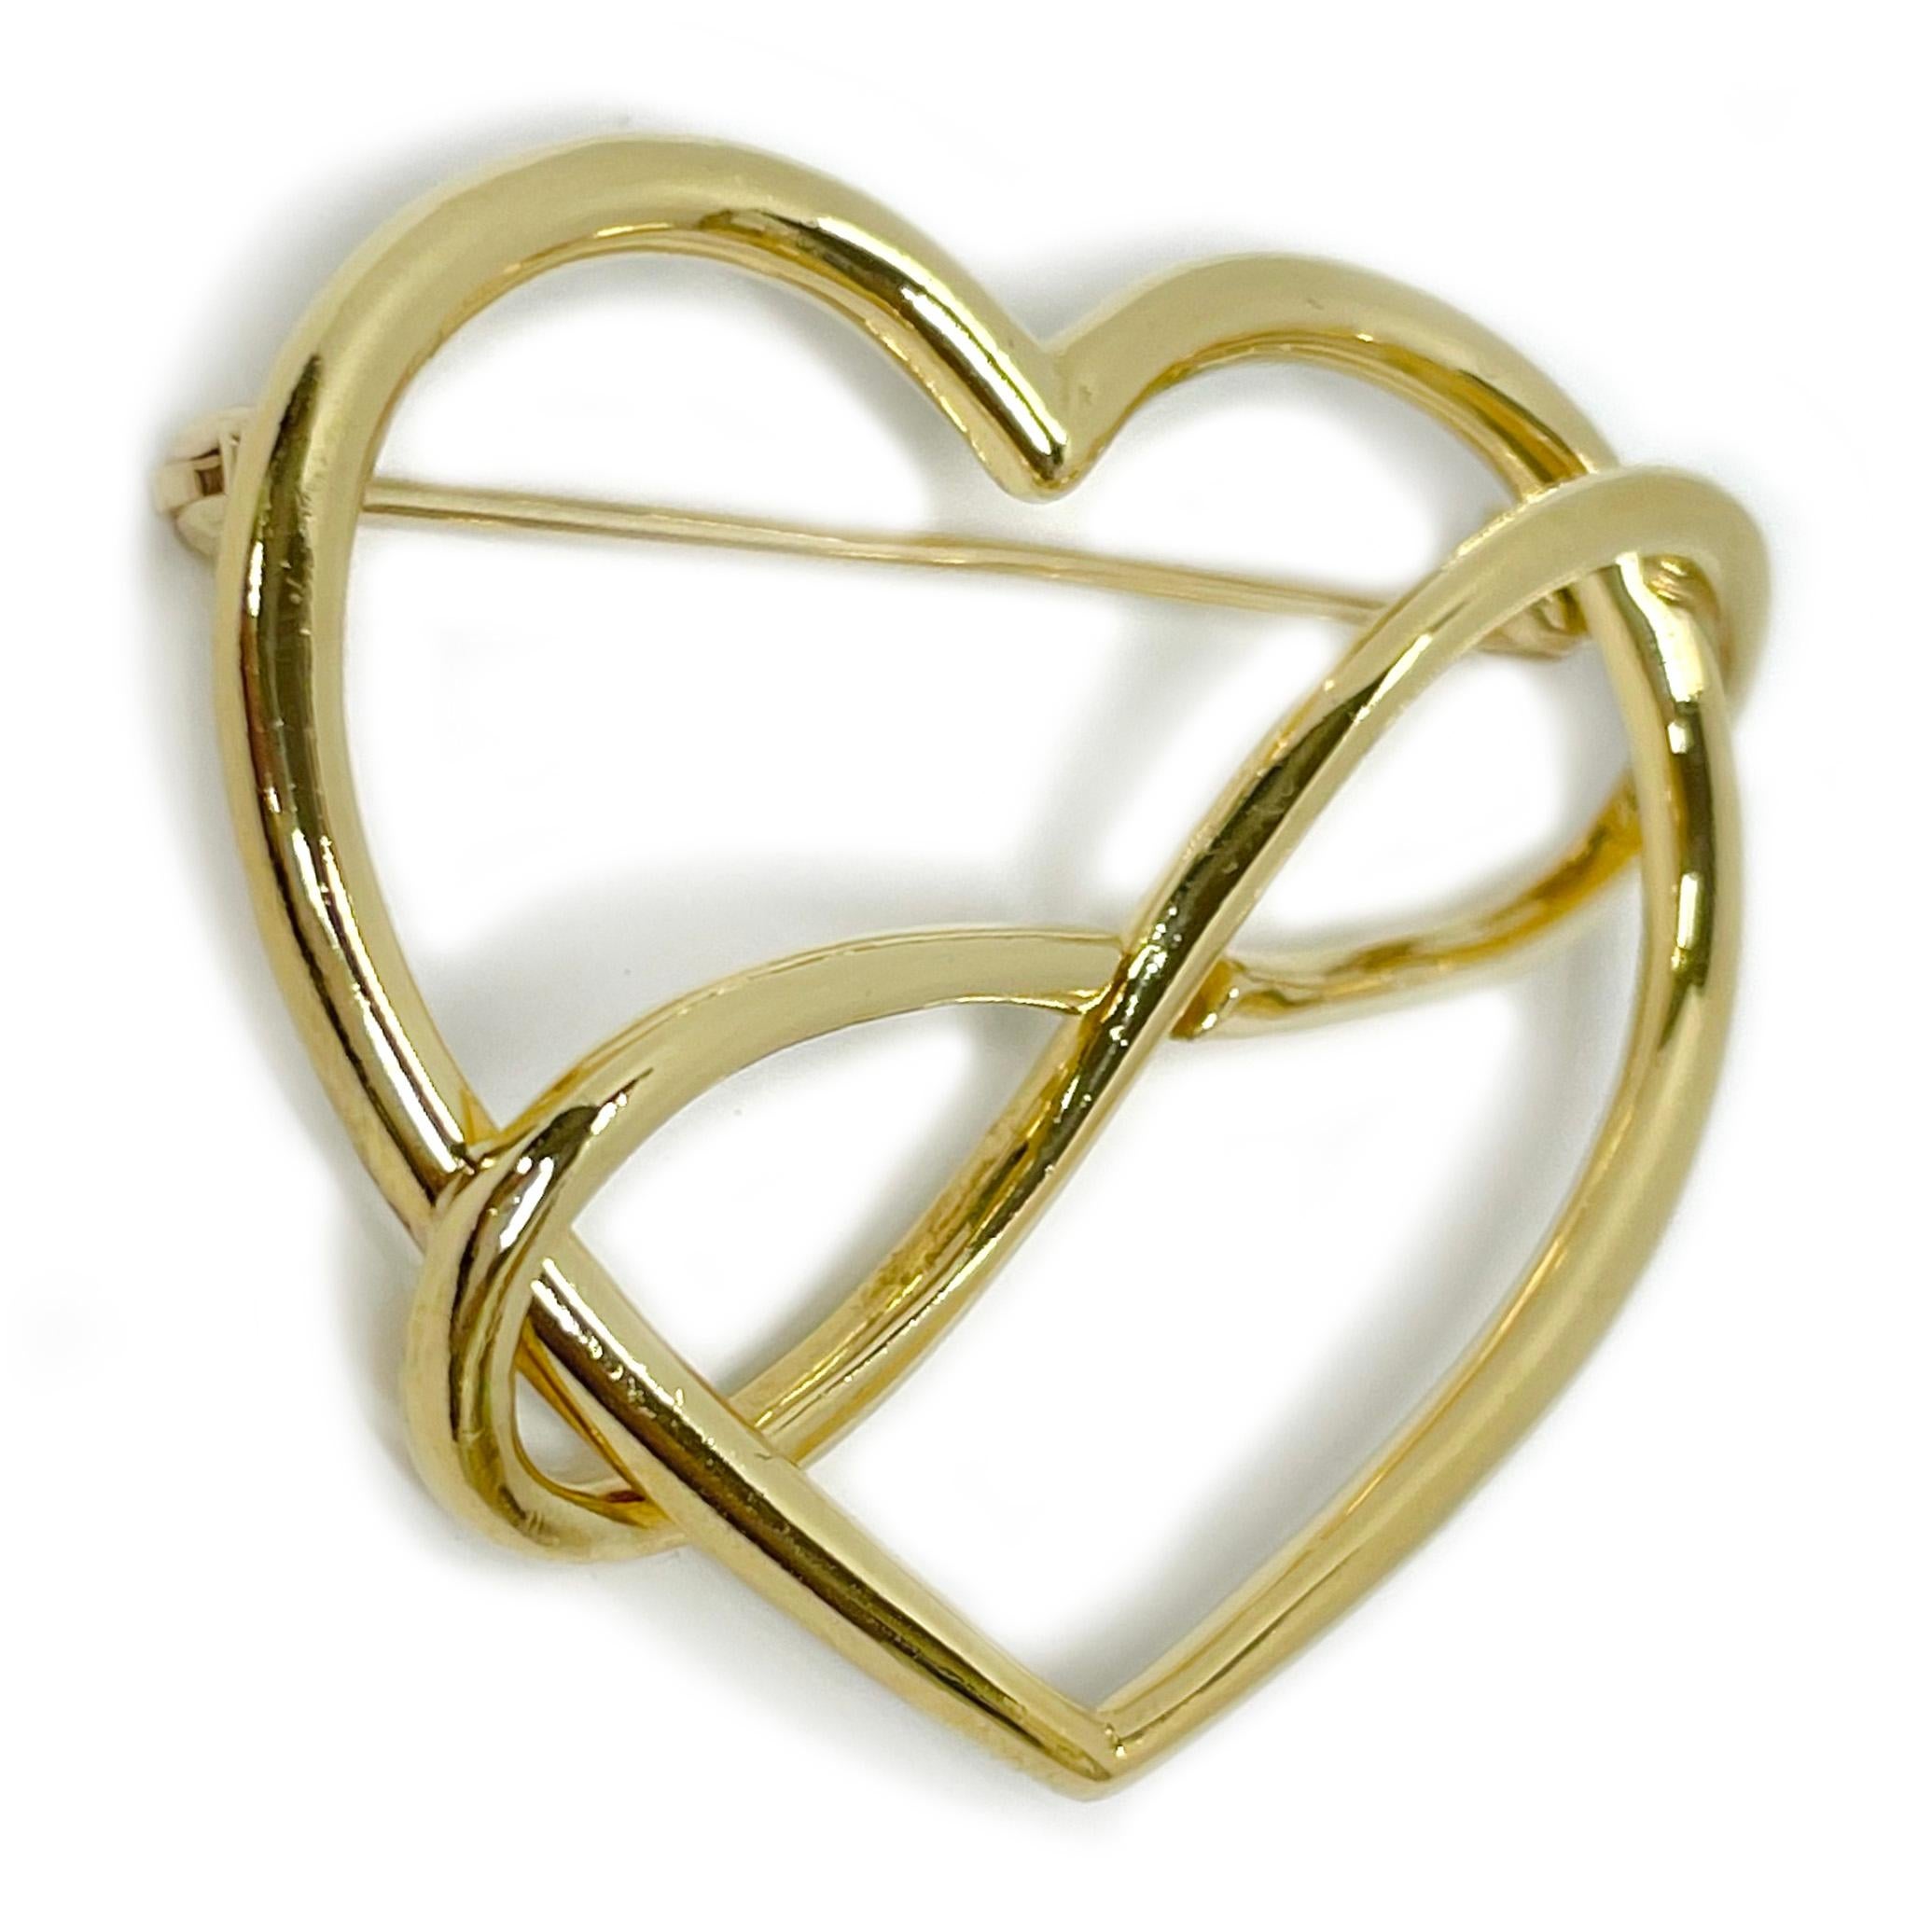 18 Karat Movado Yellow Gold Heart Infinity Brooch. The heart is made of a tubular shaped gold with an infinity loop interlocked diagonally across the heart. The brooch features two interlocking loops that create a heart. Stamped on the back of the